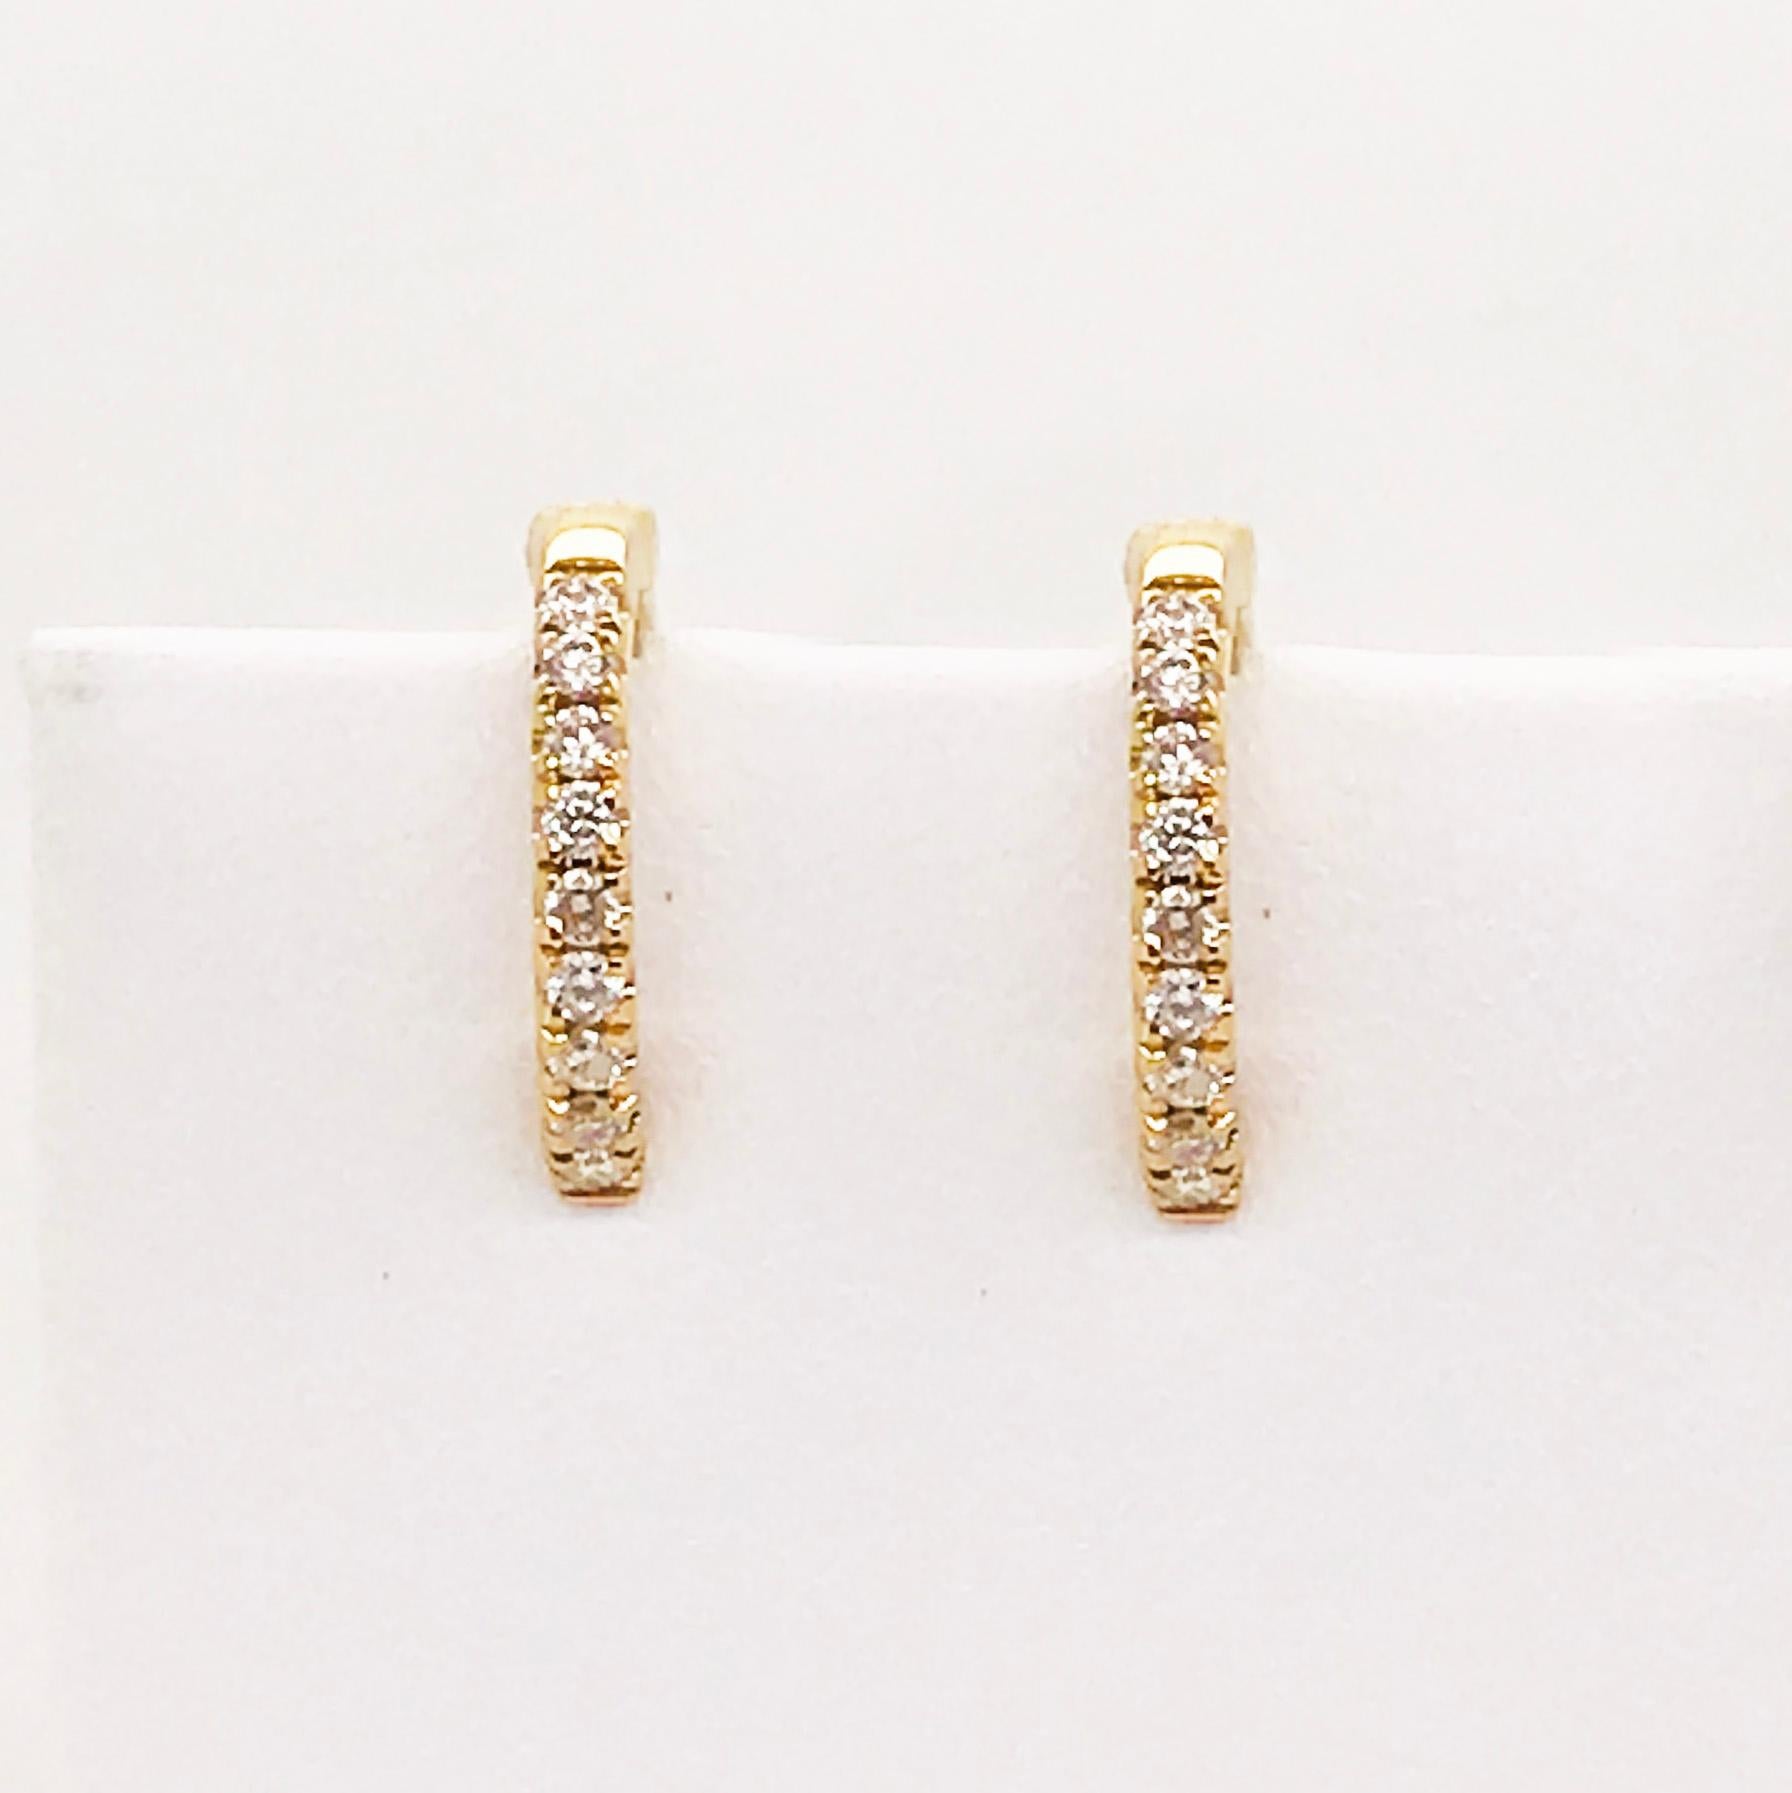 The earrings are 2020 best sellers!  The huggie earring is unique because it is a hoop earring that is cast like a ring and is; therefore, very sturdy.  It has a hinge on the bottom where you can open it easily and don’t have to keep up any earring